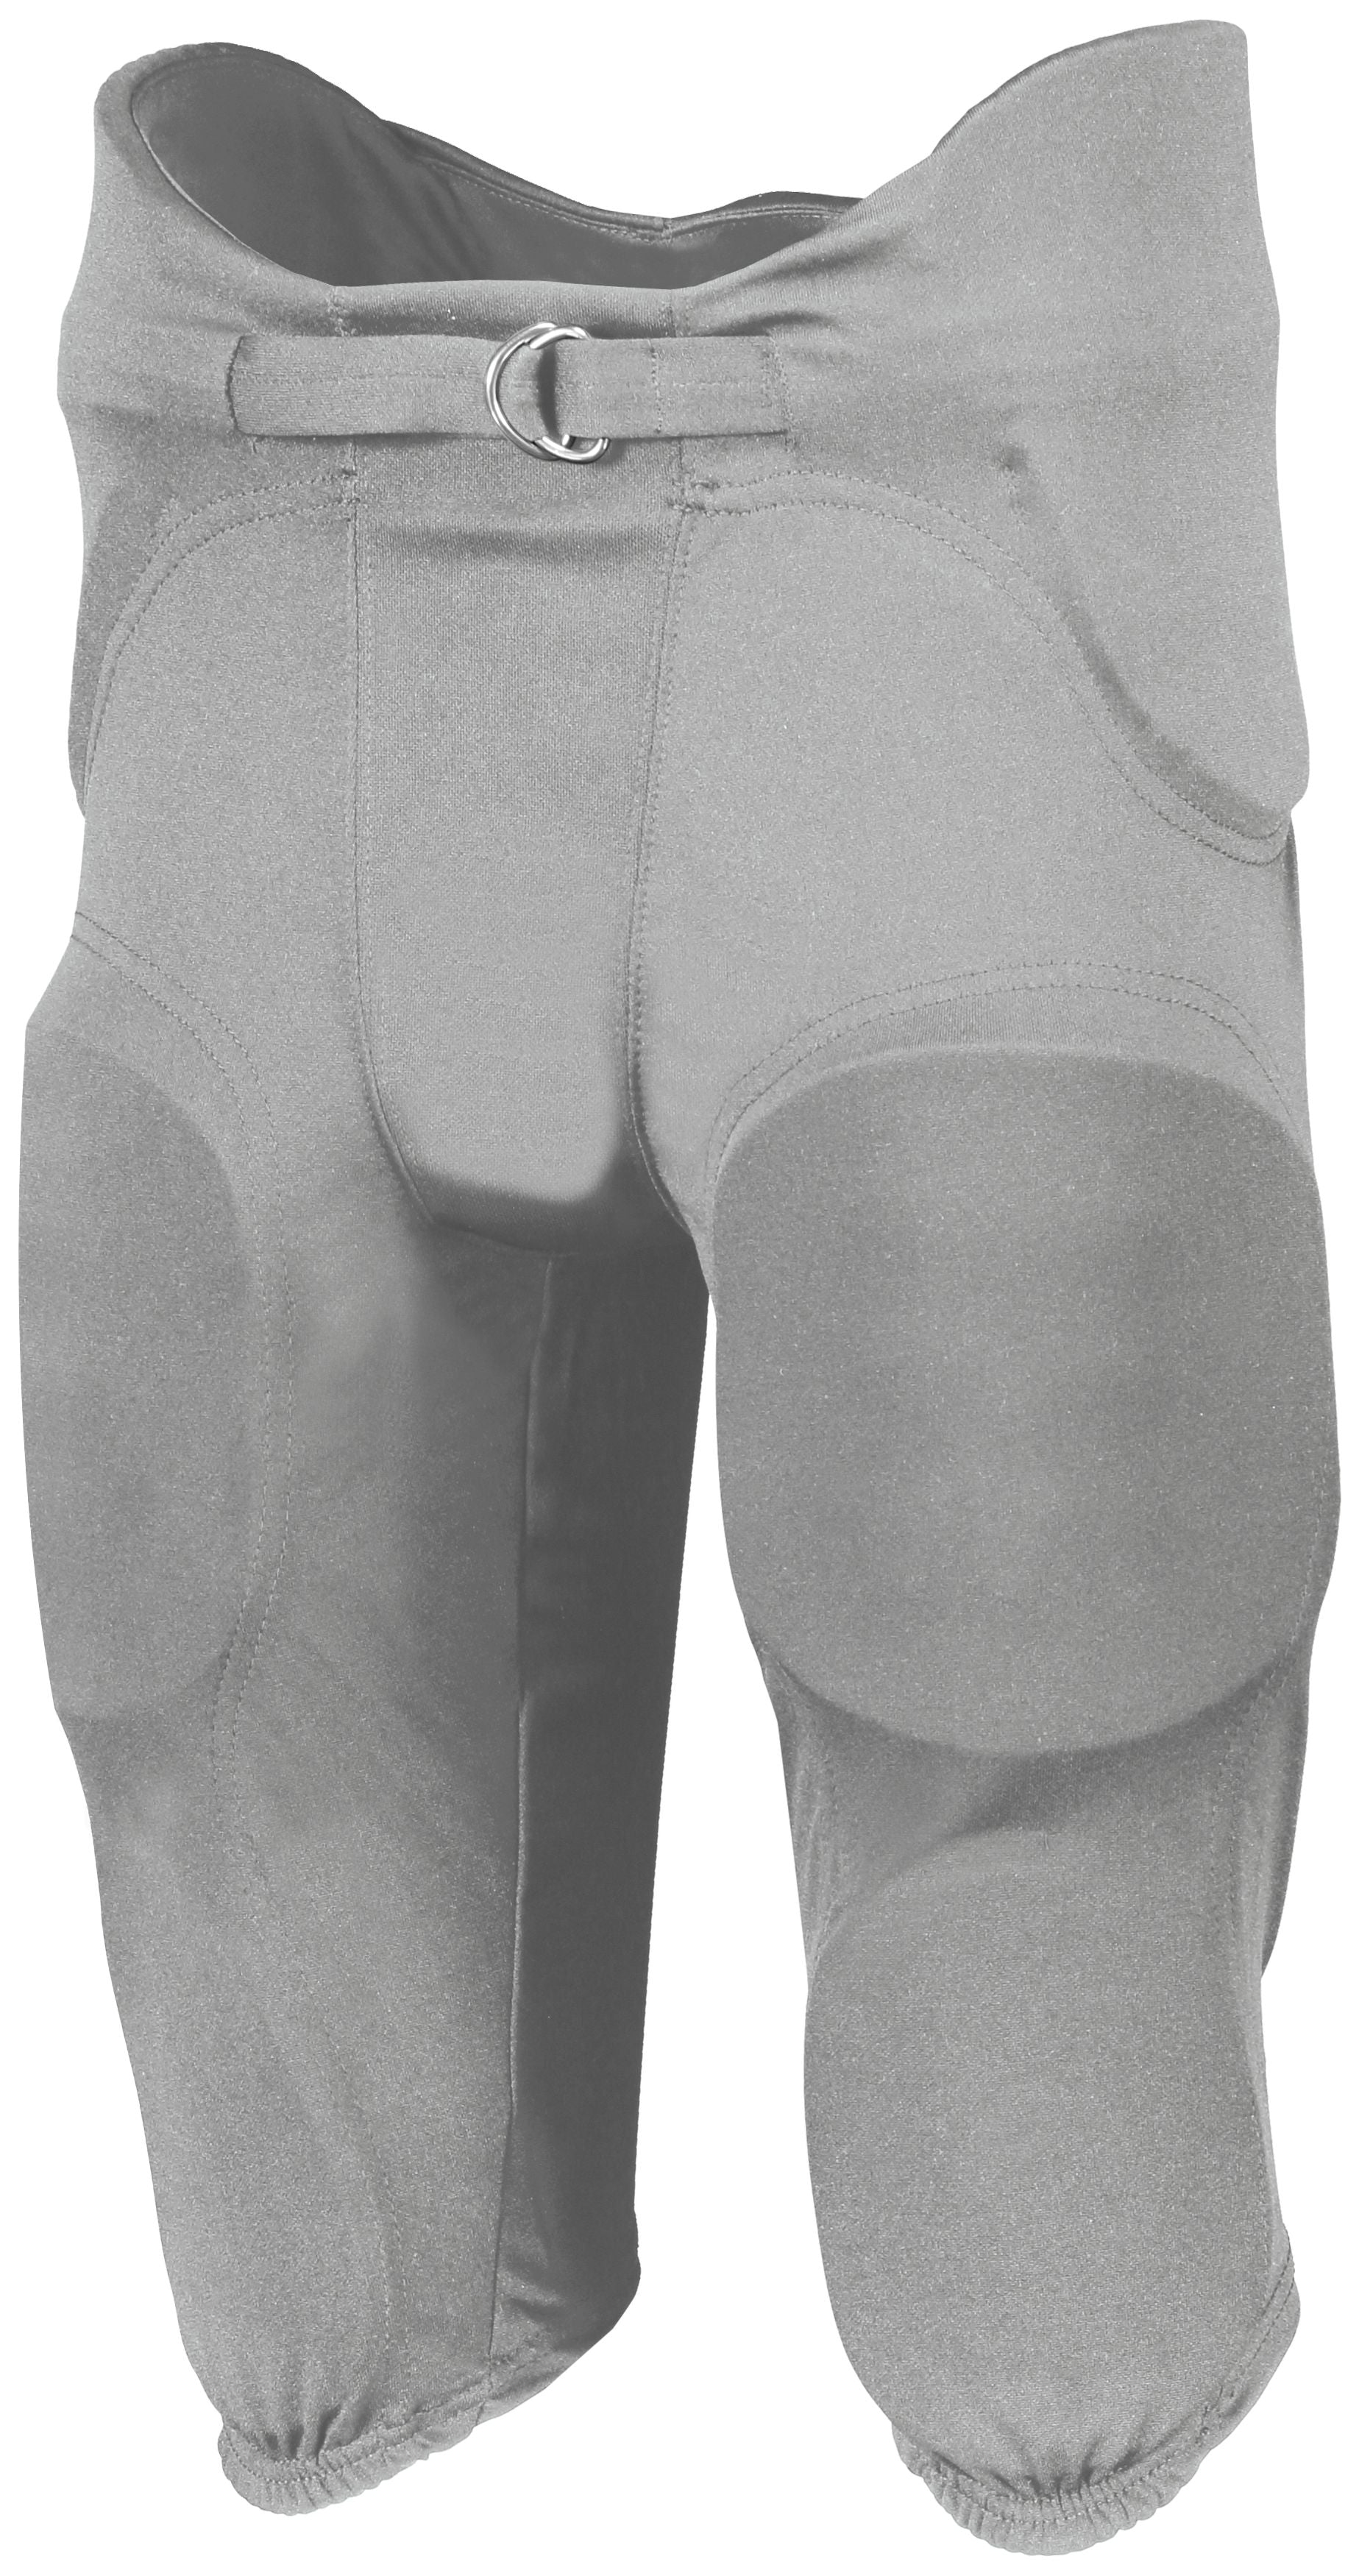 Russell Athletic Youth Integrated 7-Piece Pad Pant in Gridiron Silver  -Part of the Youth, Youth-Pants, Pants, Football, Russell-Athletic-Products, All-Sports, All-Sports-1 product lines at KanaleyCreations.com